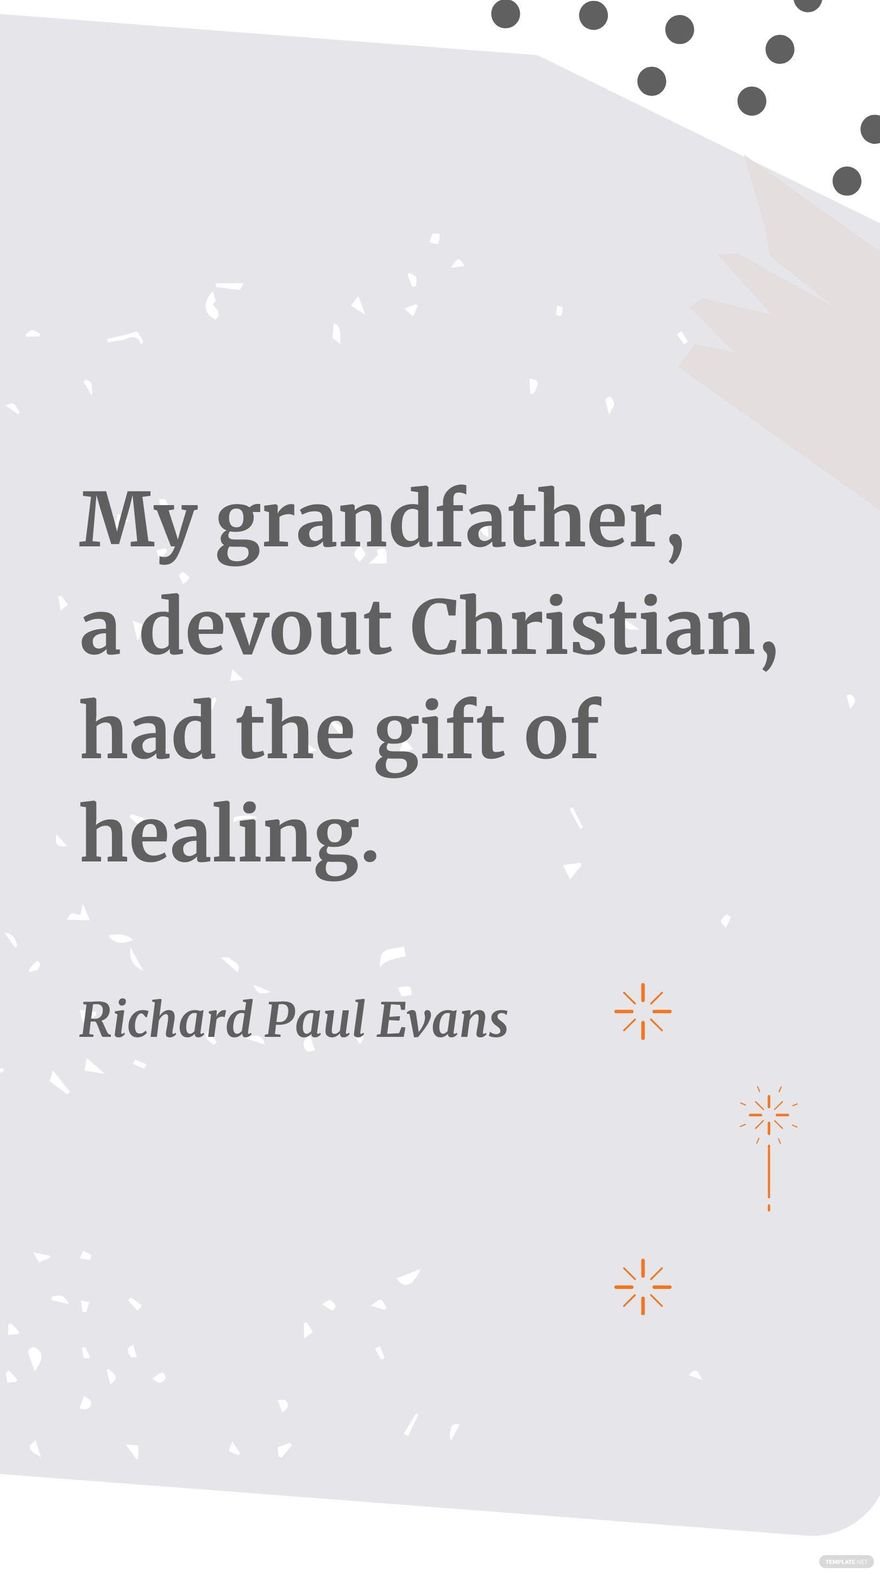 Free Richard Paul Evans - My grandfather, a devout Christian, had the gift of healing.